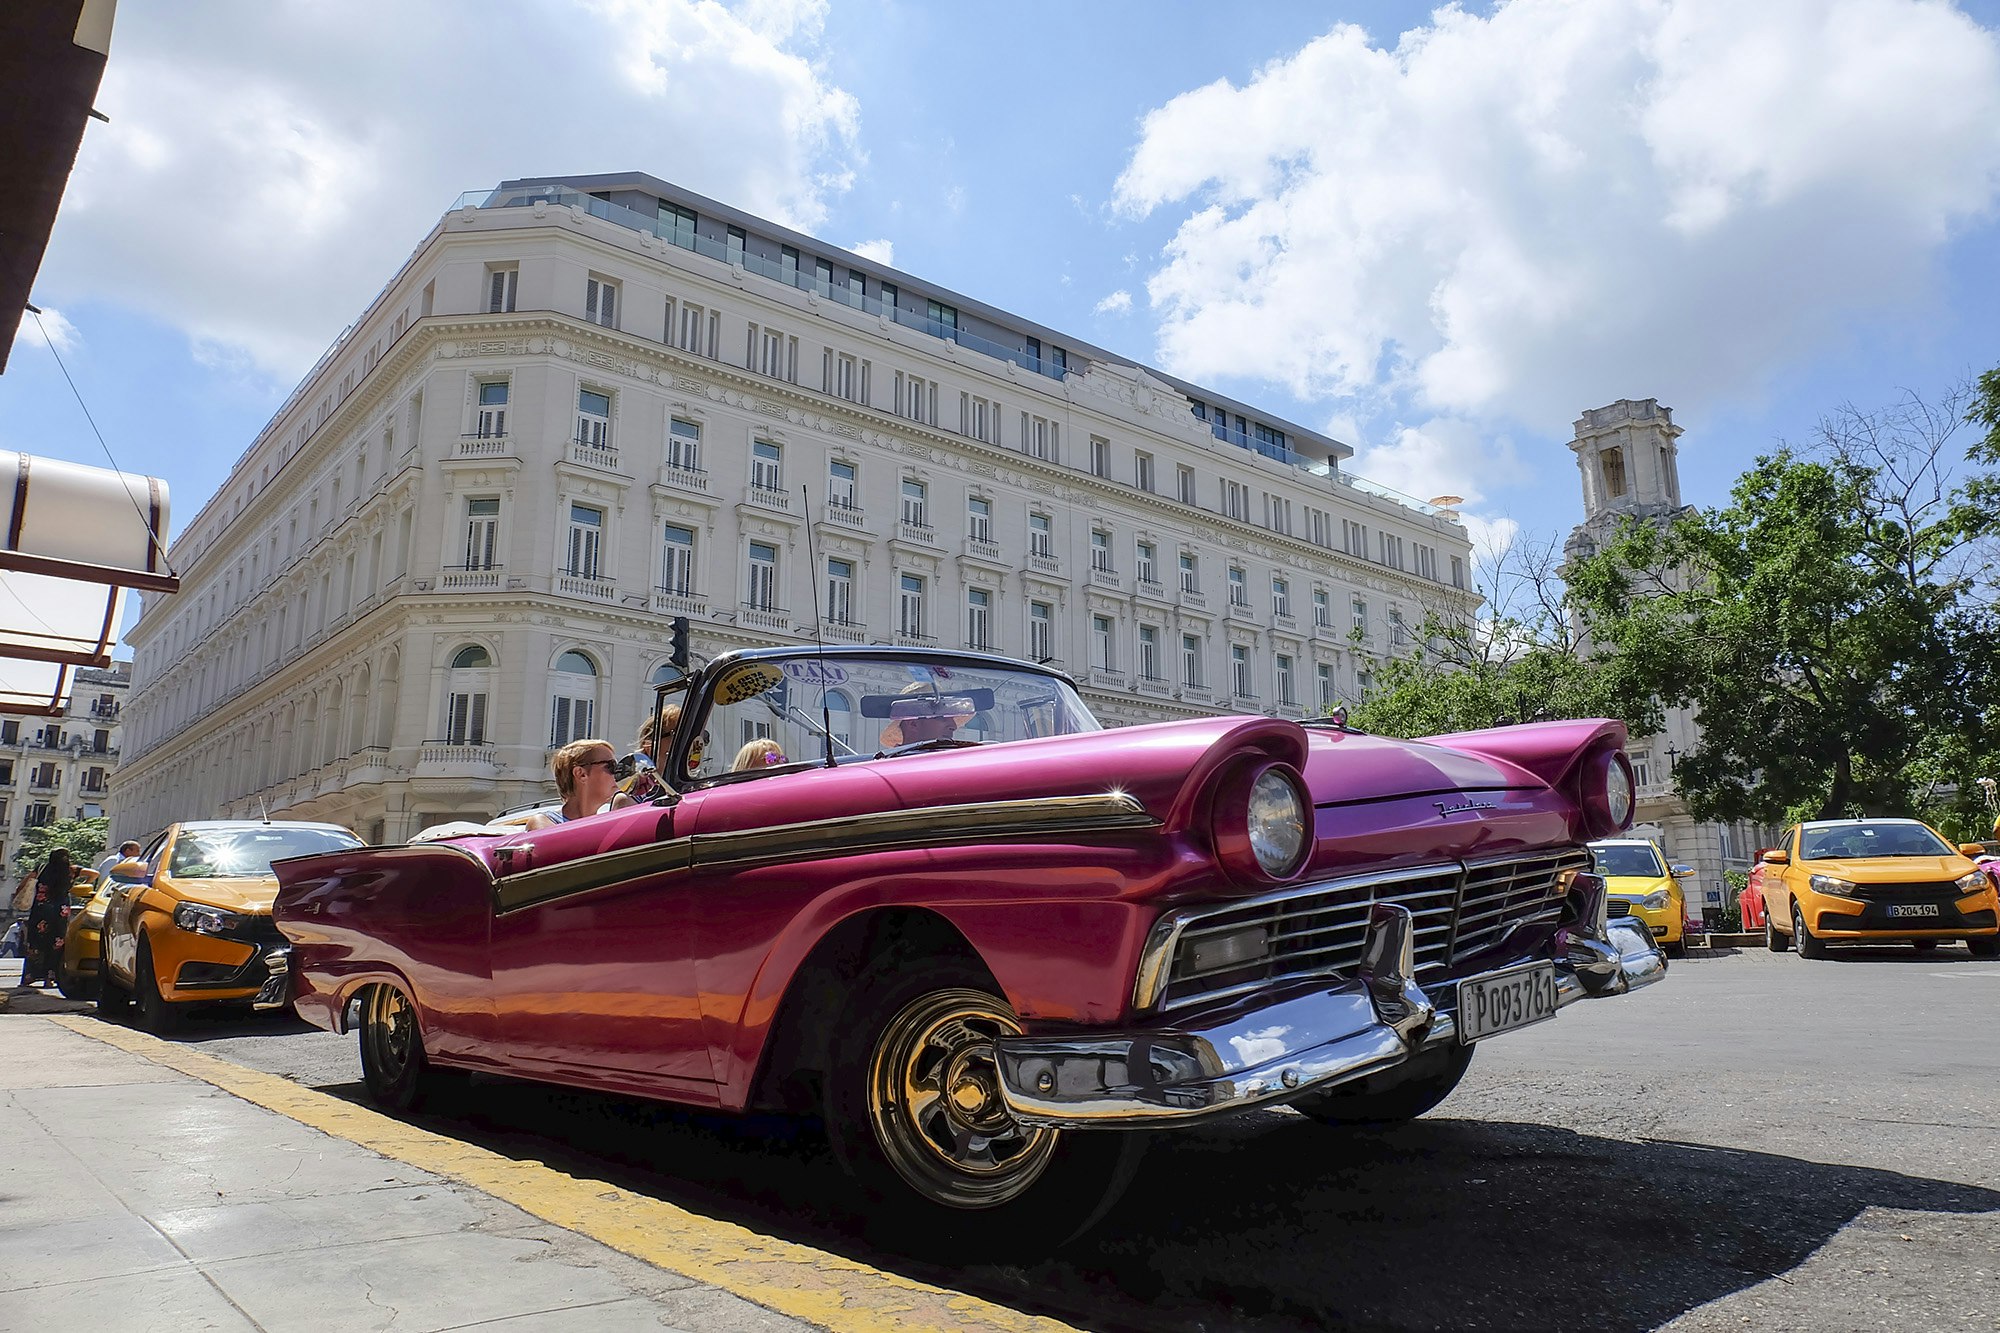 US Department of State upgrades Cuba travel advisory